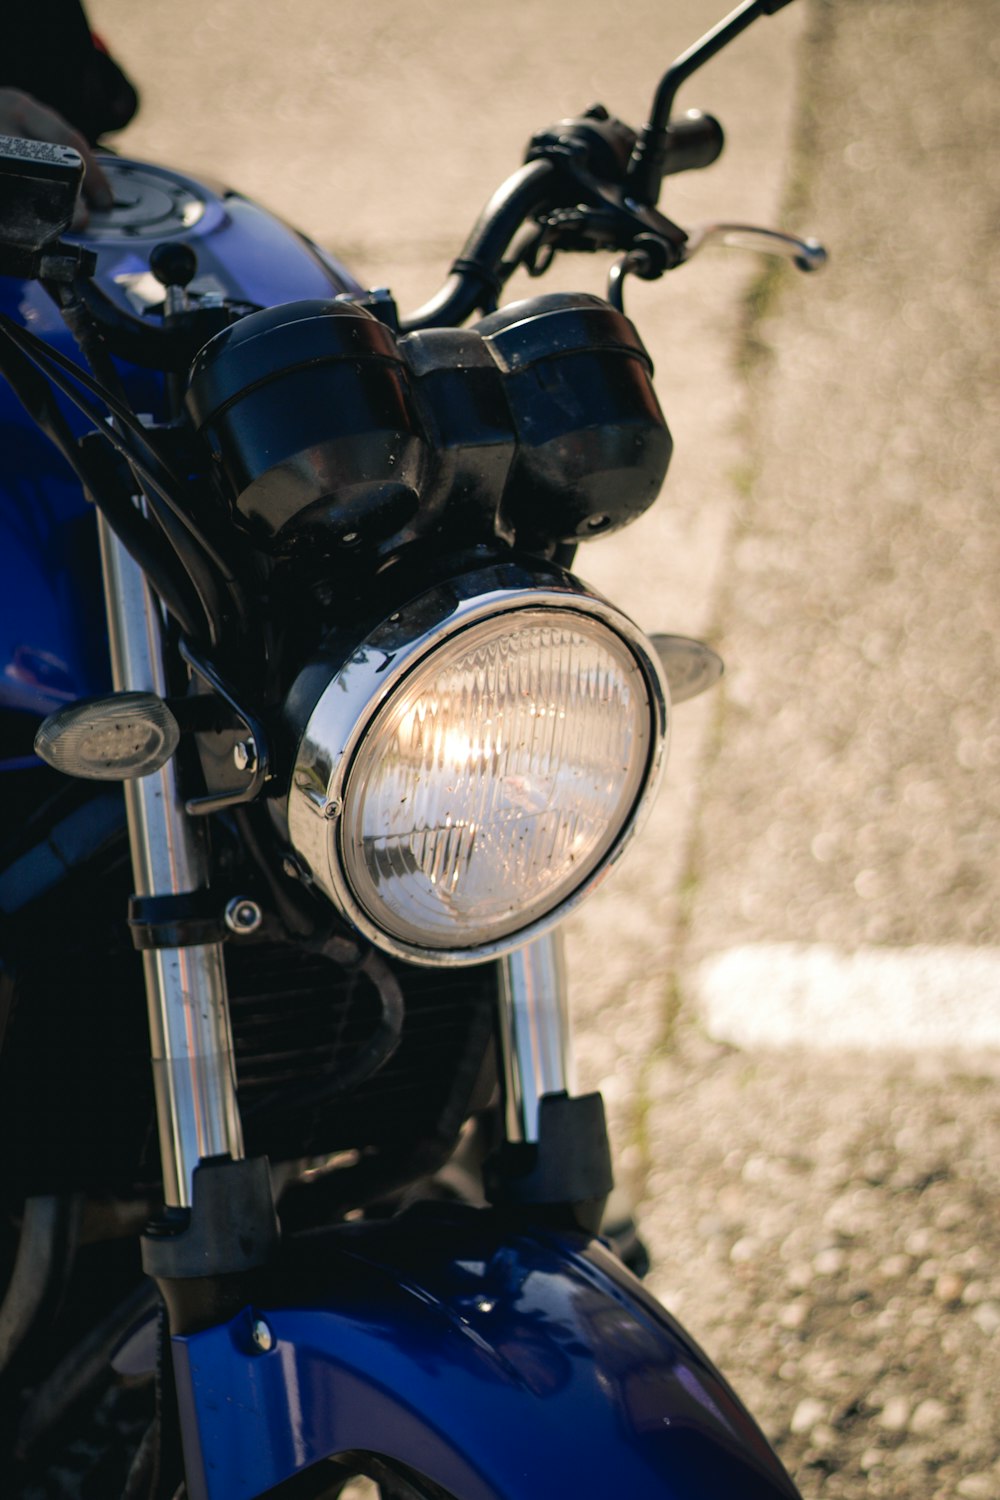 a close up of a motorcycle's headlight